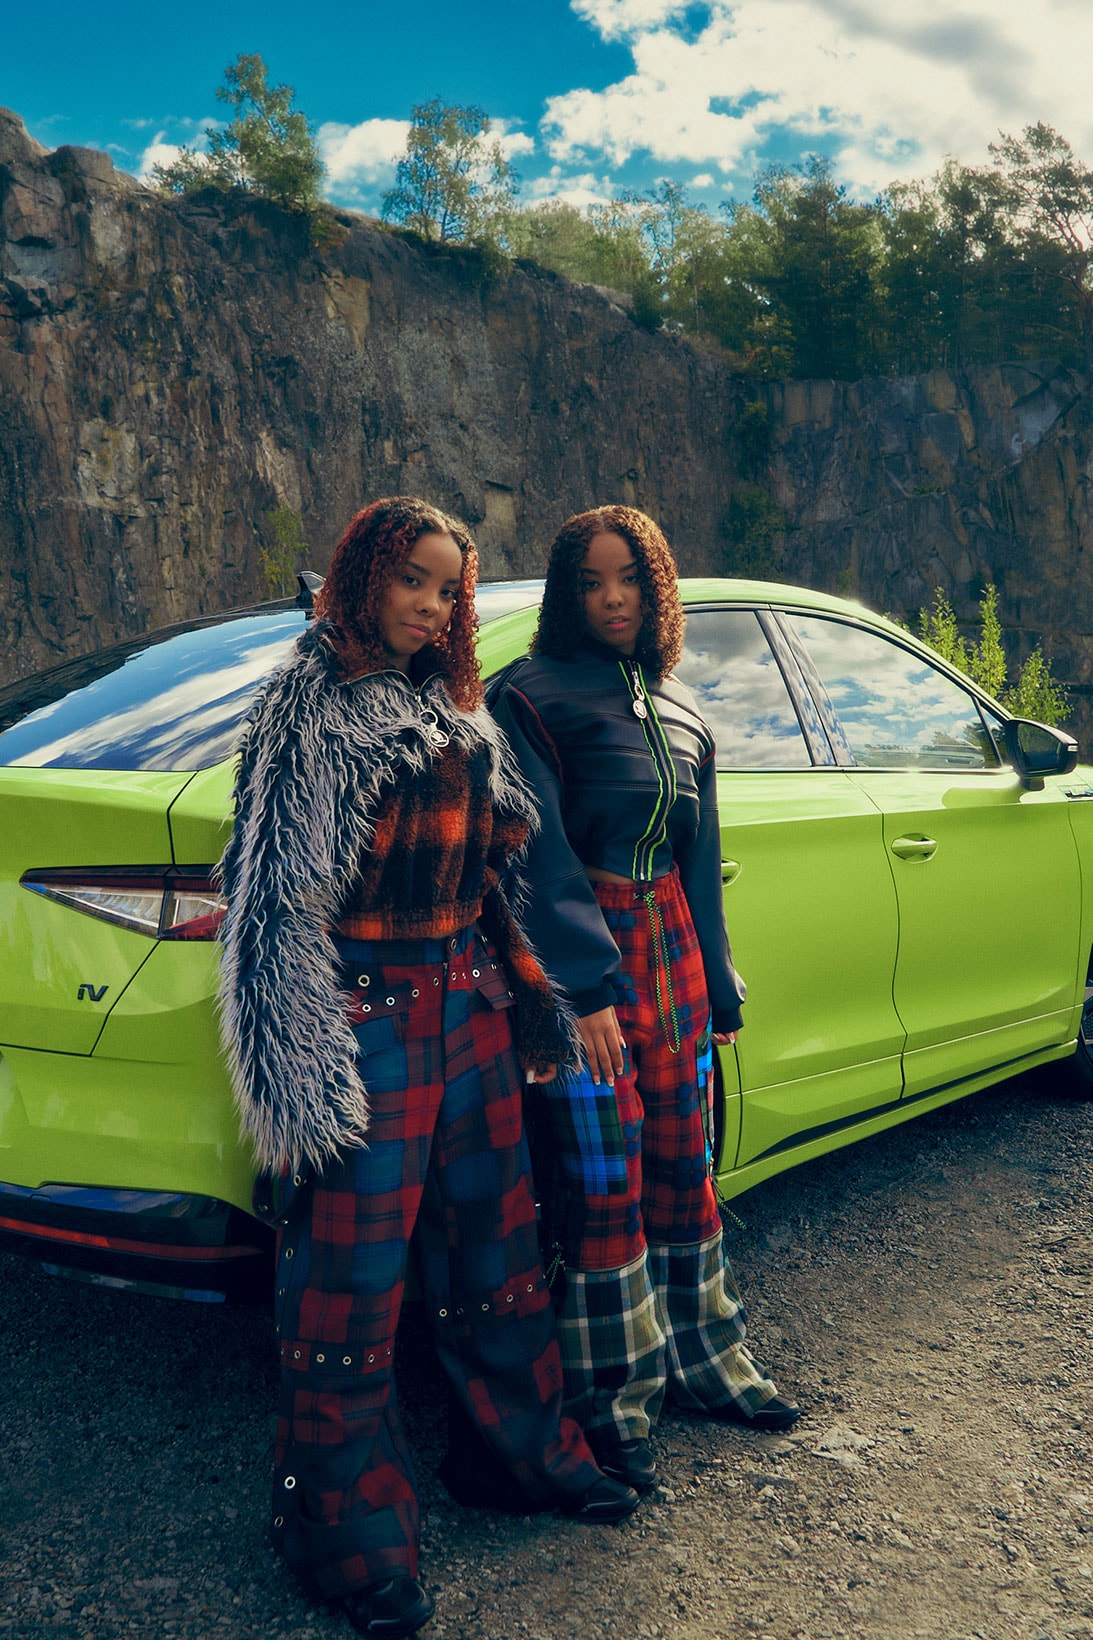 Škoda Upcycles Car Parts for This Eco-Punk Fashion Line